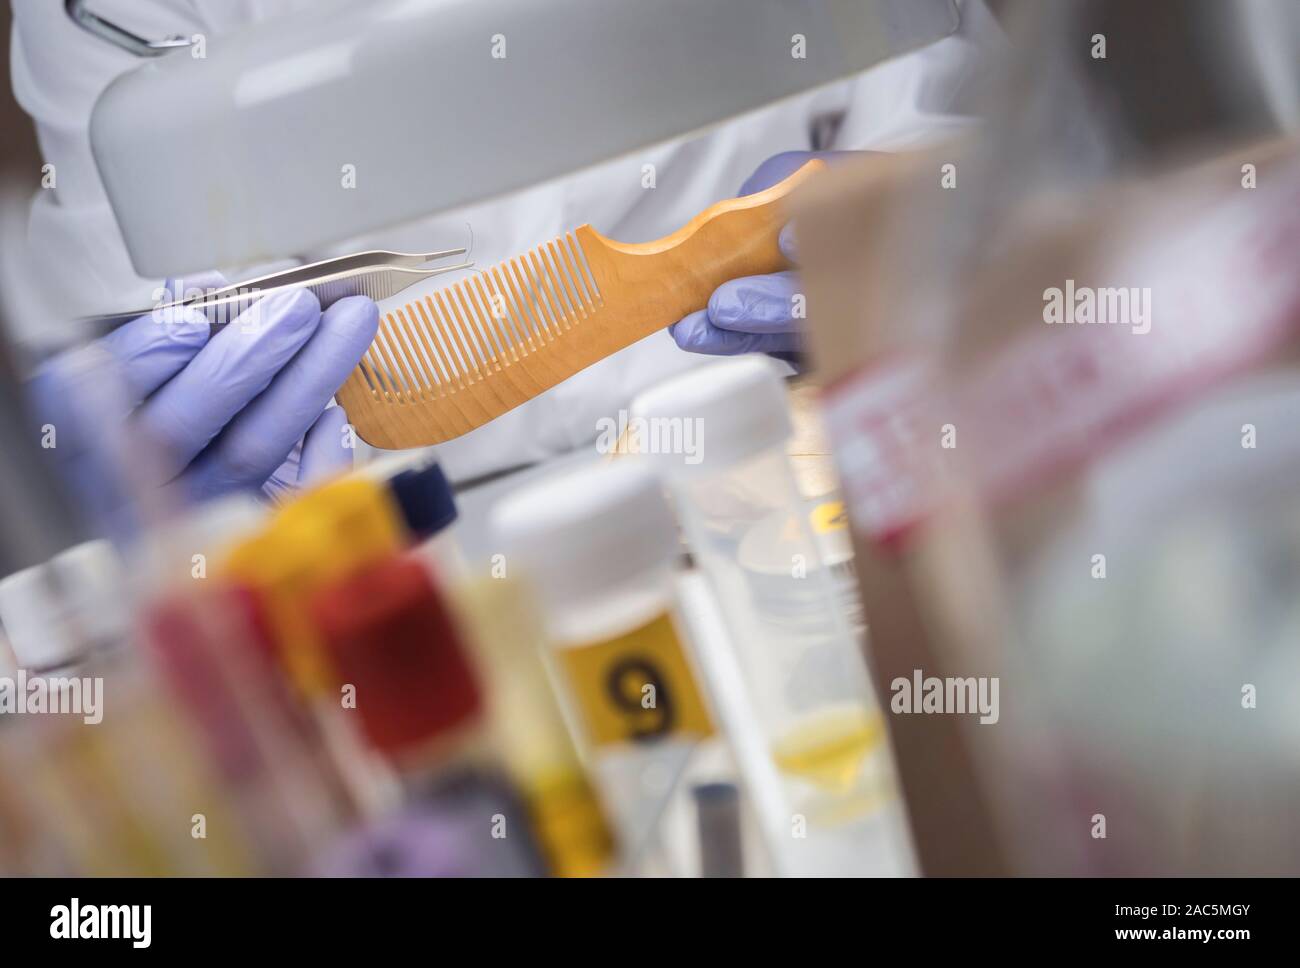 Scientist Police hold murder victim comb to find dna in crime lab, concept image Stock Photo